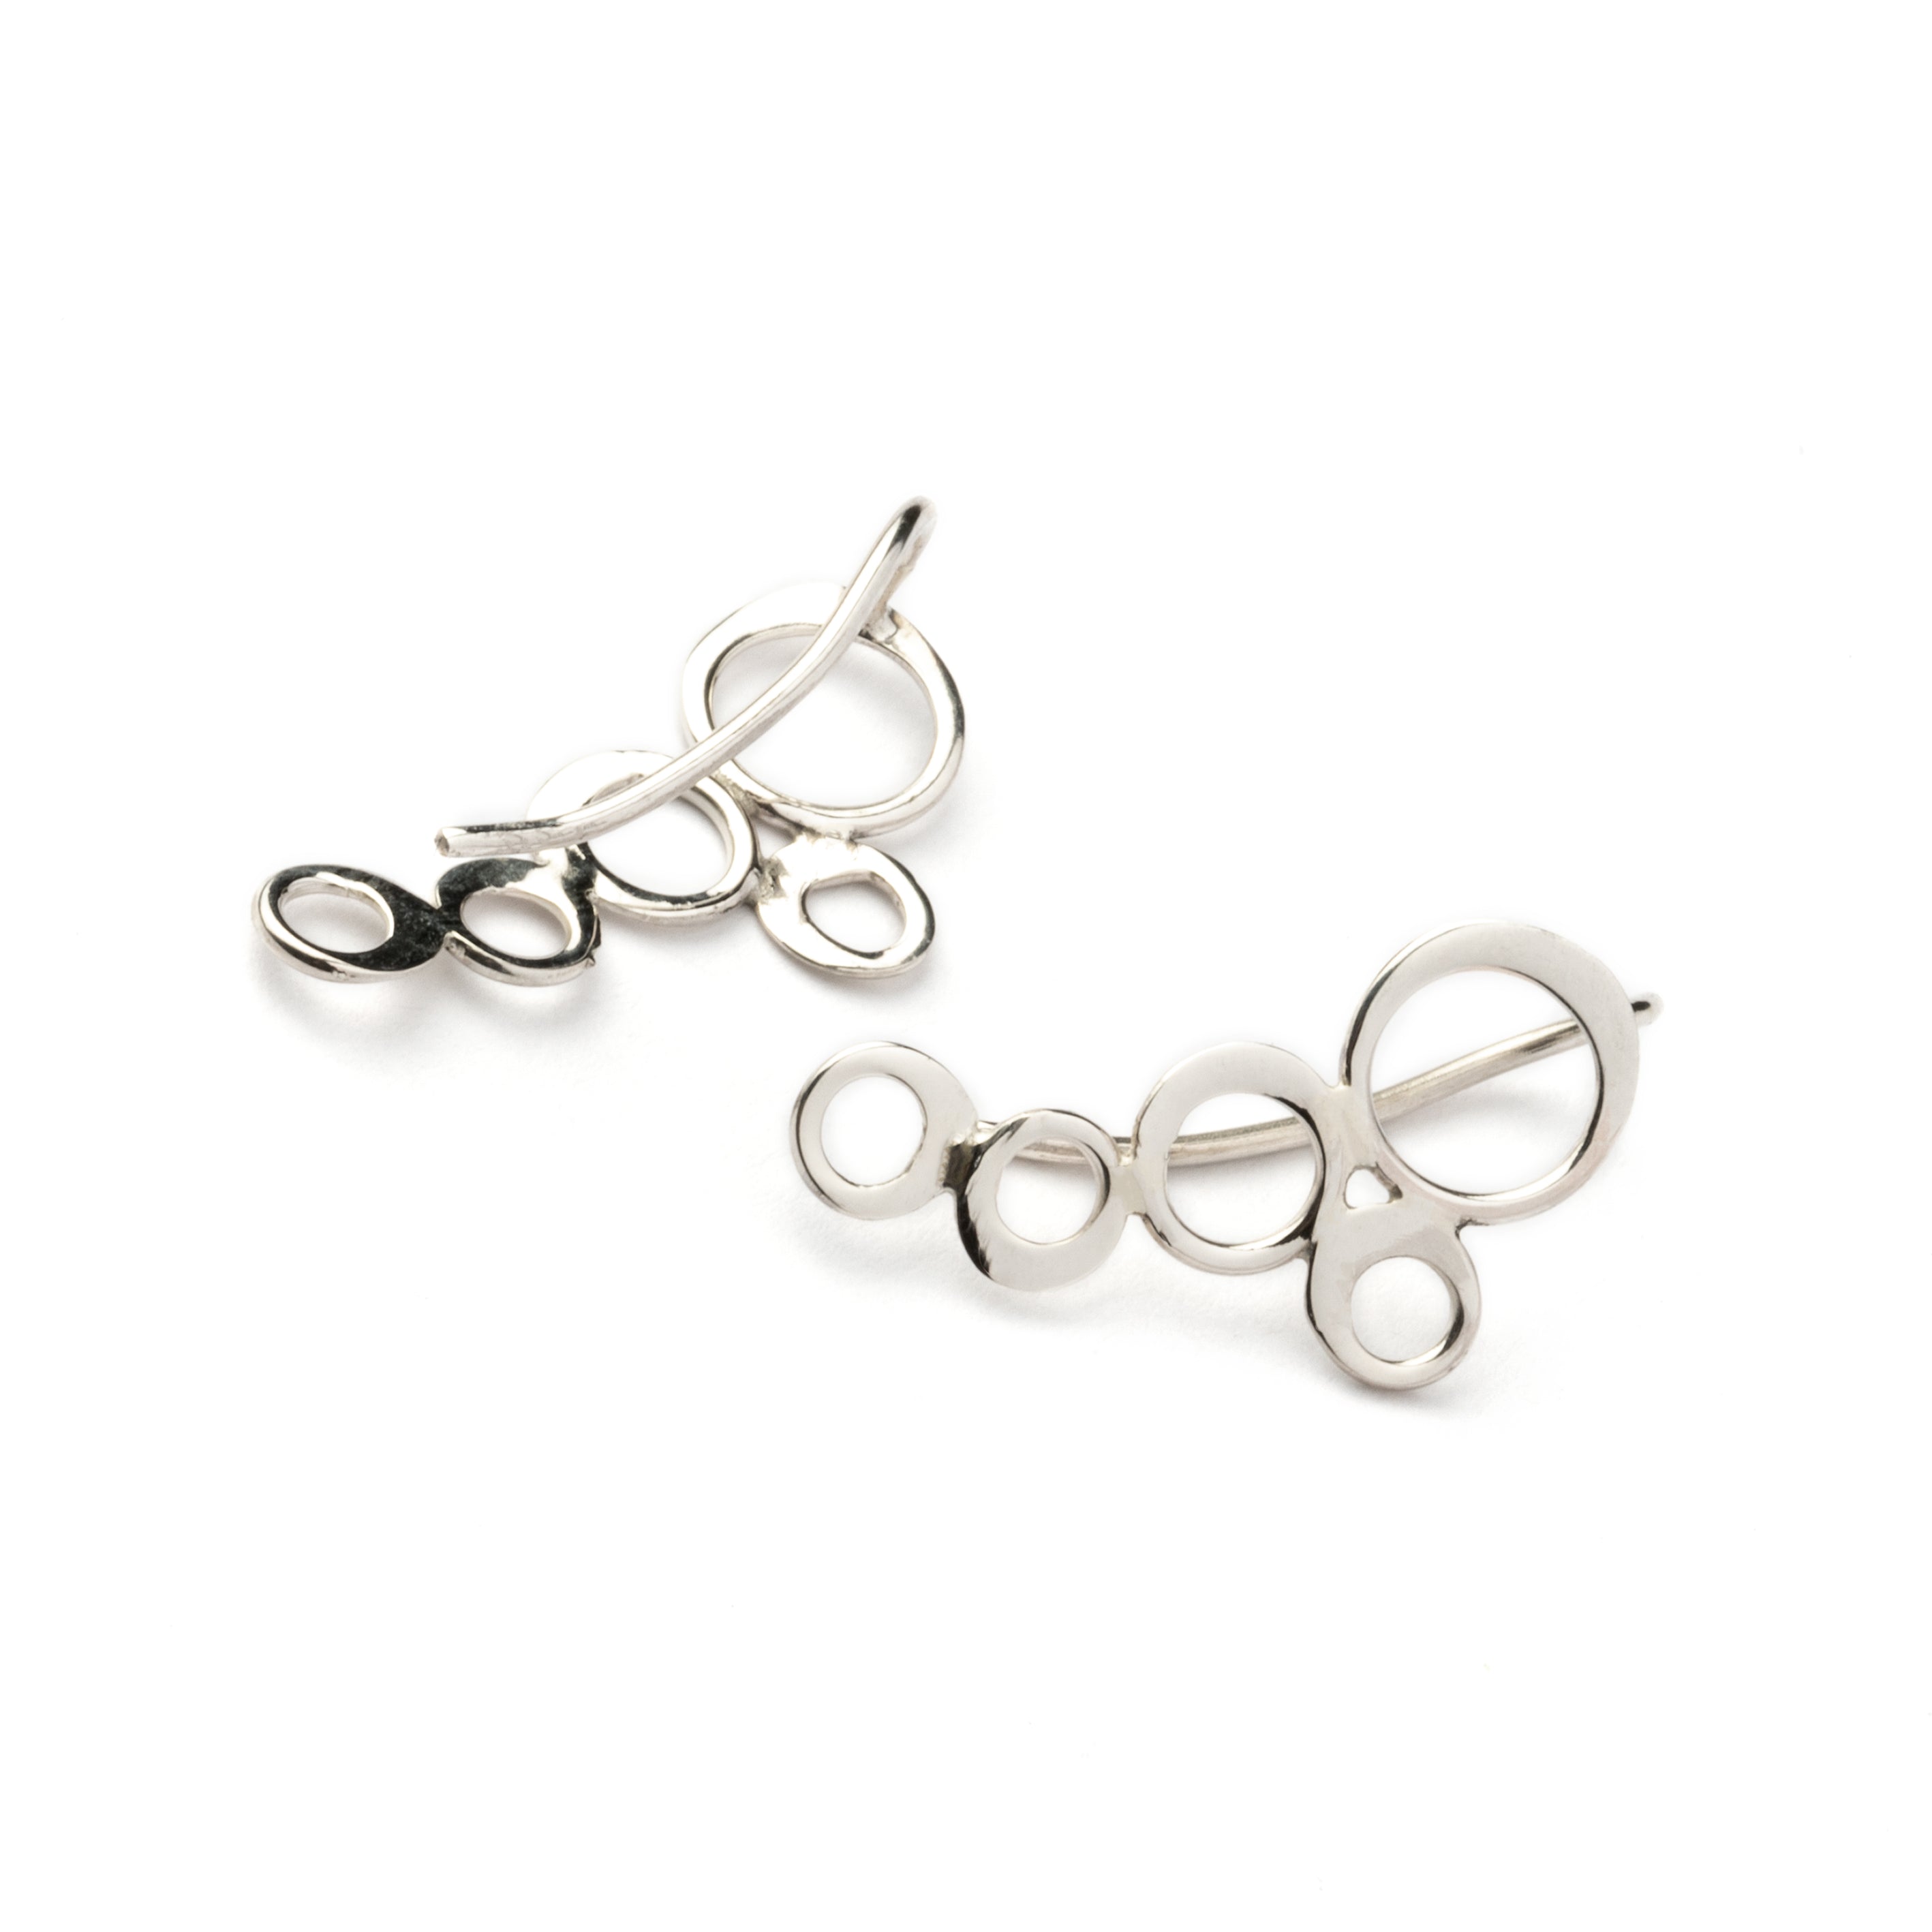 pair of silver circles ear climbers front and back view